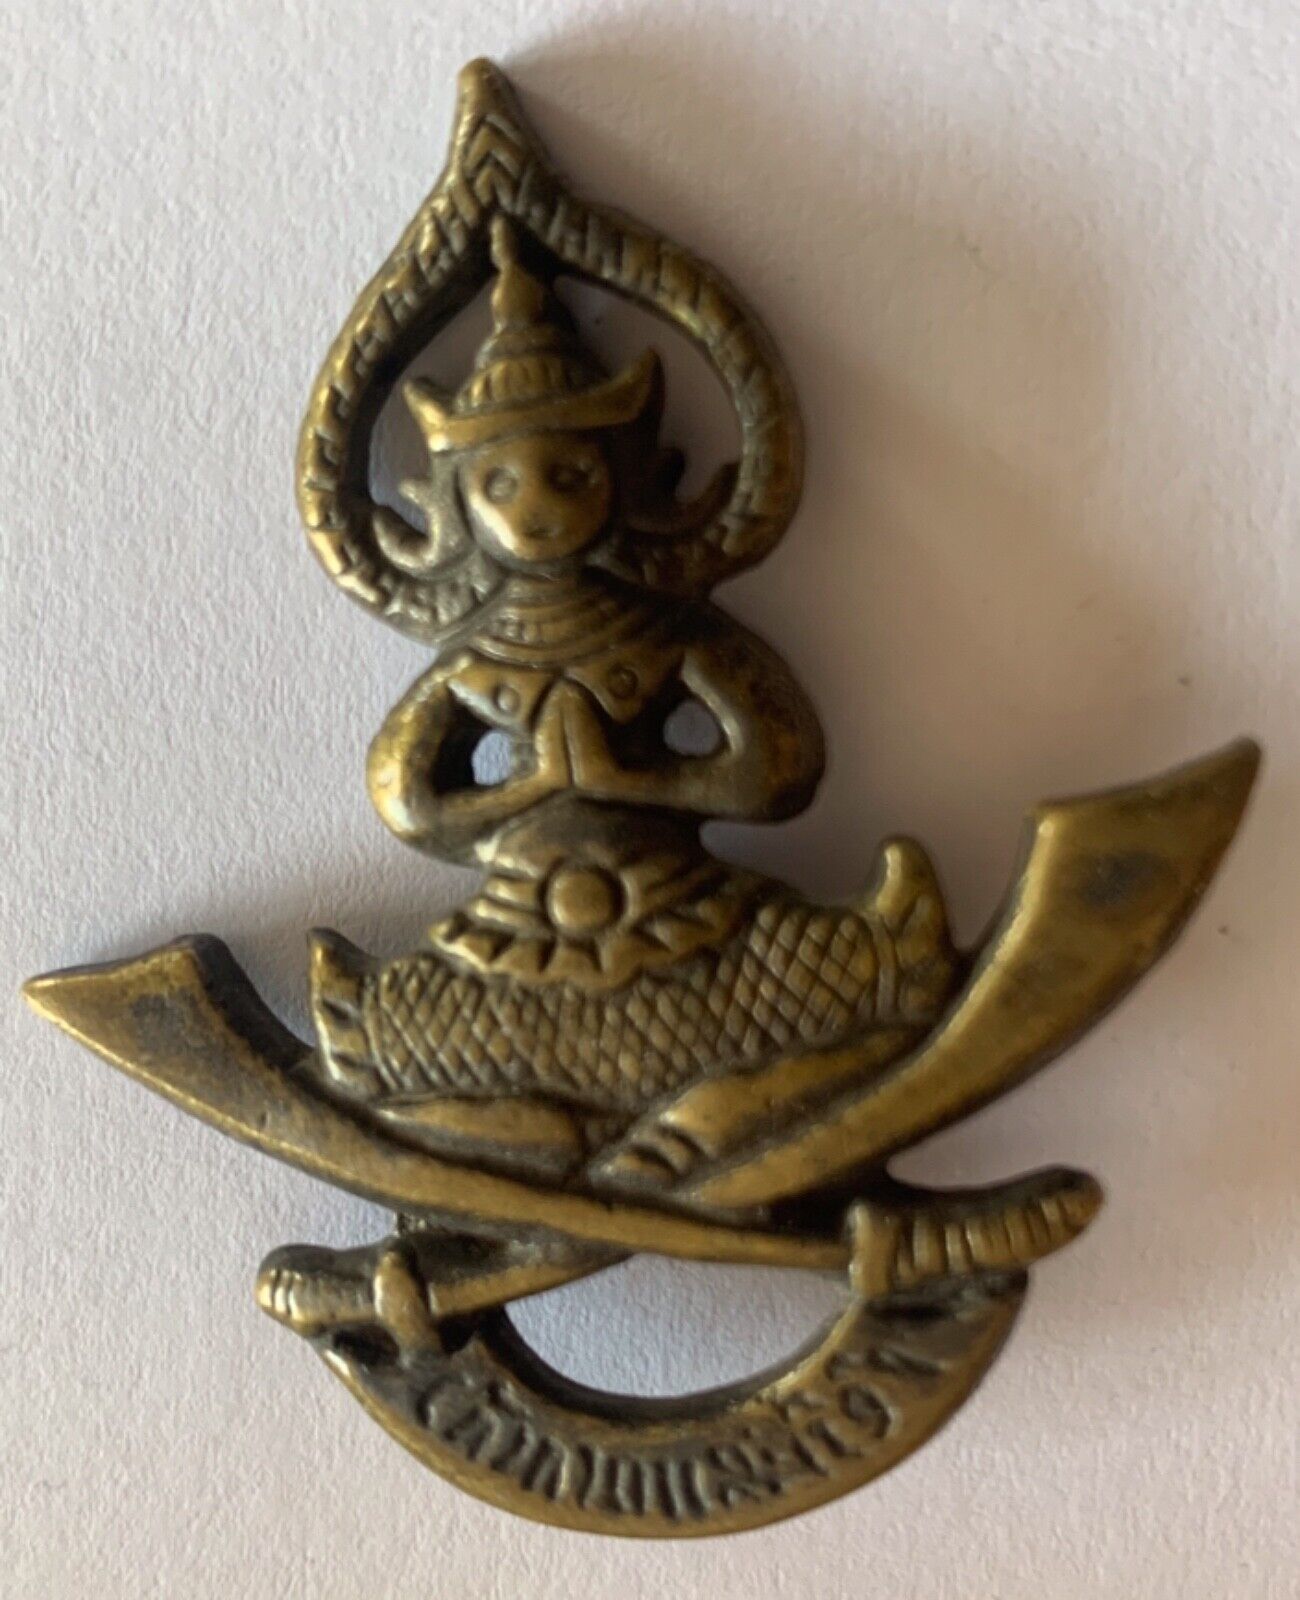 RARE ORIGINAL FRANCE WAR BADGE LAOS INDOCHINA ARMY LOCAL 1st RECON IN COUNTRY